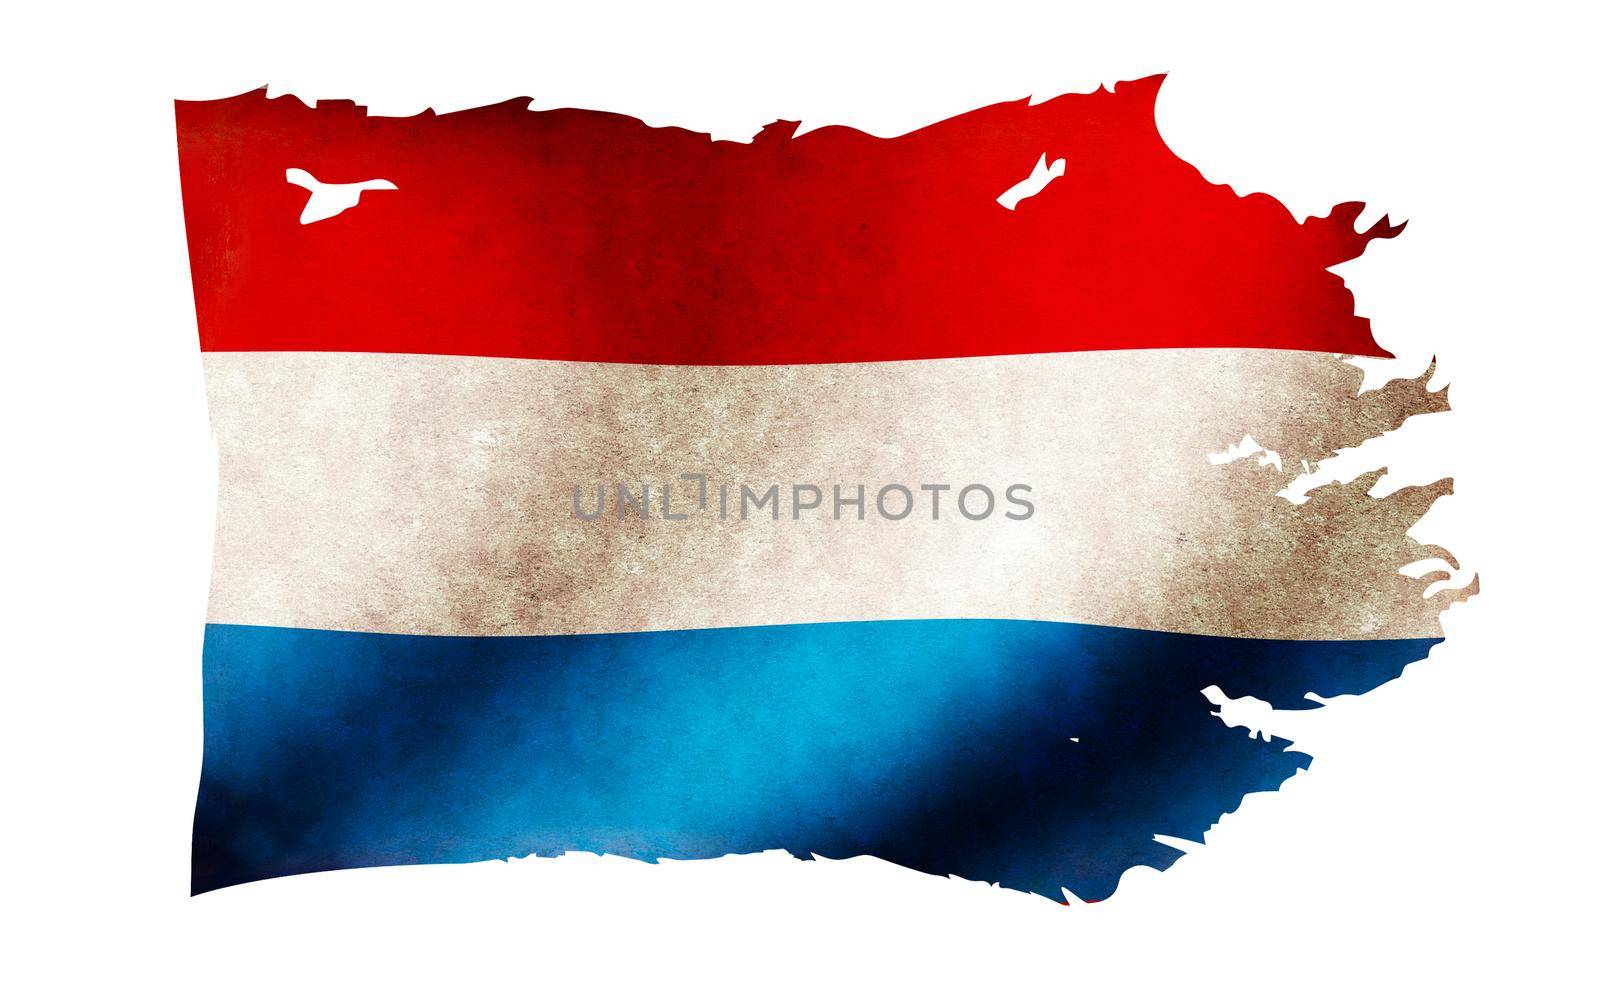 Dirty and torn country flag illustration / Netherlands by barks